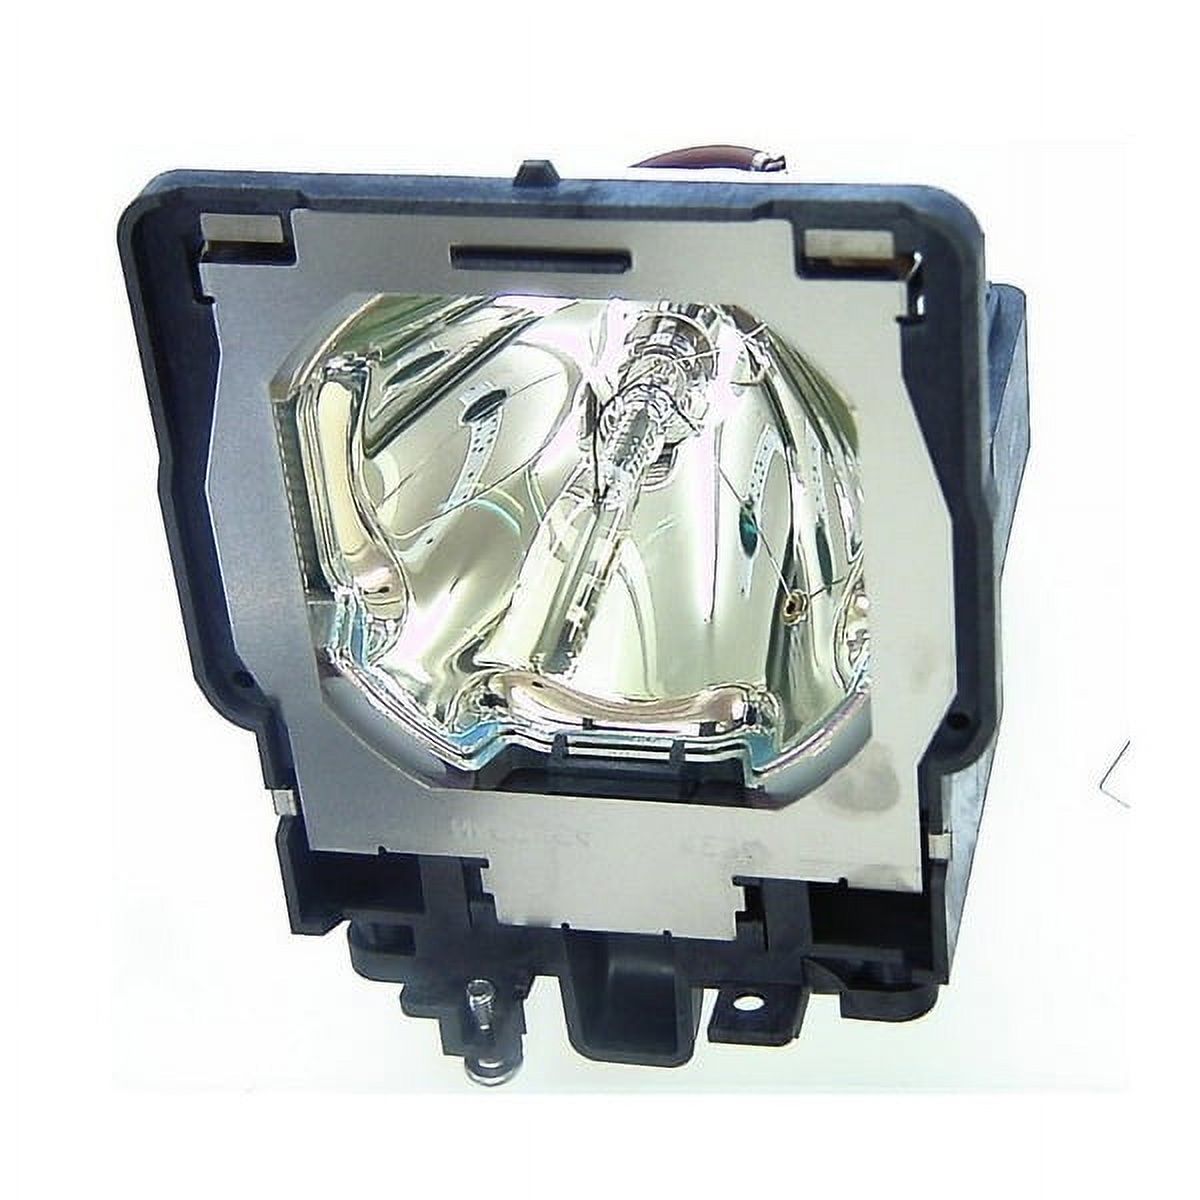 Panasonic  ET-SLMP109 Assembly Lamp with Quality Projector Bulb Inside - image 1 of 1